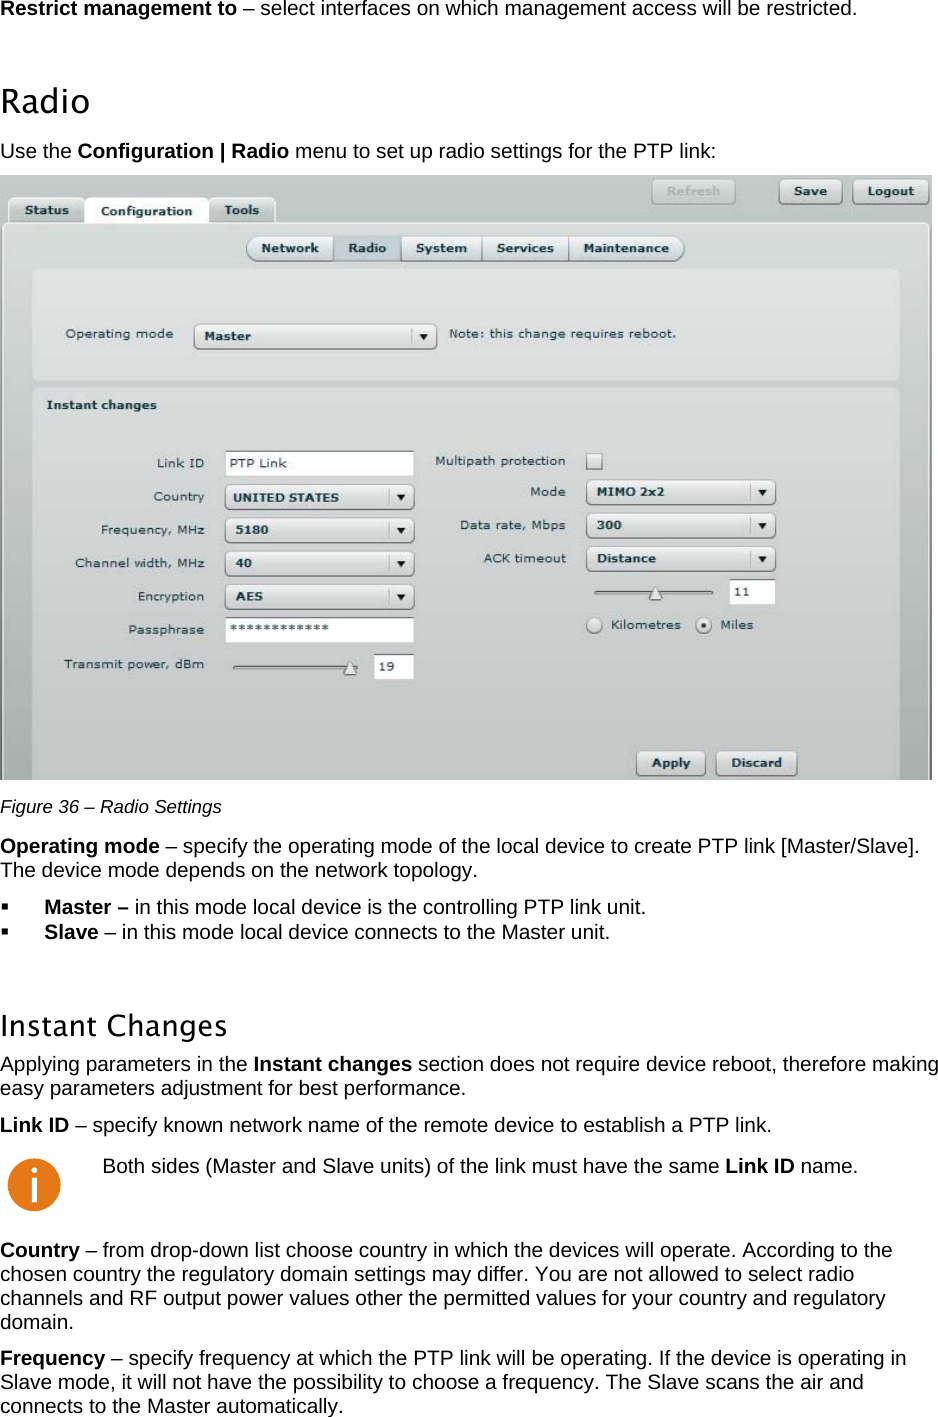  LigoWave Page 31 Restrict management to – select interfaces on which management access will be restricted.   Radio  Use the Configuration | Radio menu to set up radio settings for the PTP link:   Figure 36 – Radio Settings Operating mode – specify the operating mode of the local device to create PTP link [Master/Slave]. The device mode depends on the network topology.   Master – in this mode local device is the controlling PTP link unit.   Slave – in this mode local device connects to the Master unit.   Instant Changes  Applying parameters in the Instant changes section does not require device reboot, therefore making easy parameters adjustment for best performance.  Link ID – specify known network name of the remote device to establish a PTP link.   Both sides (Master and Slave units) of the link must have the same Link ID name. Country – from drop-down list choose country in which the devices will operate. According to the chosen country the regulatory domain settings may differ. You are not allowed to select radio channels and RF output power values other the permitted values for your country and regulatory domain.  Frequency – specify frequency at which the PTP link will be operating. If the device is operating in Slave mode, it will not have the possibility to choose a frequency. The Slave scans the air and connects to the Master automatically. 